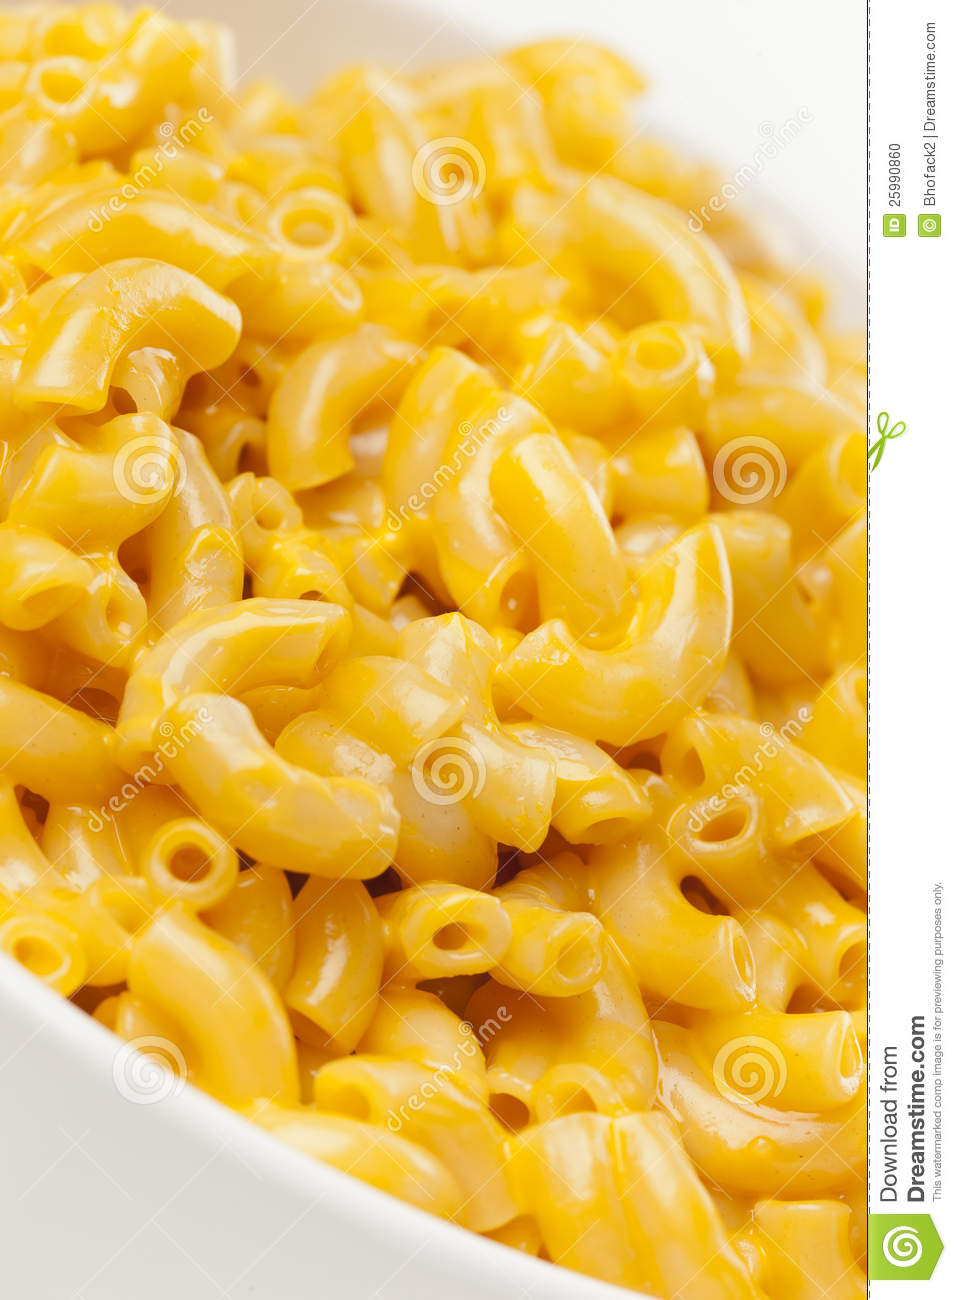 Macaroni And Cheese In A Bowl Stock Photo   Image  25990860